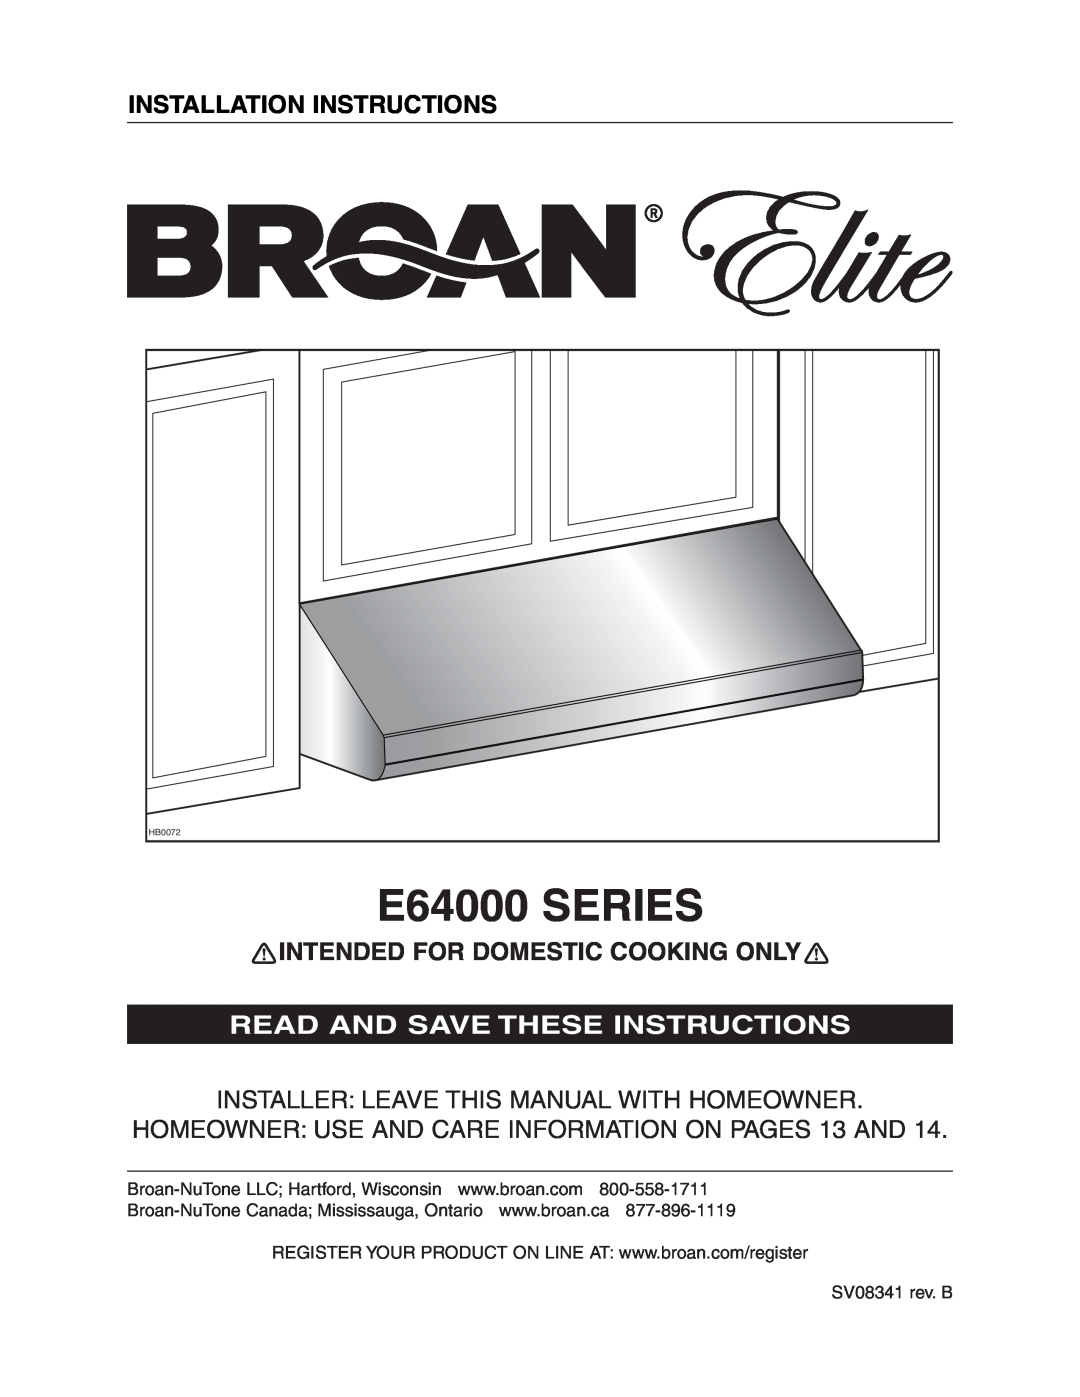 Broan MH4CFL42E installation instructions E64000 SERIES, Installation Instructions, Intended For Domestic Cooking Only 